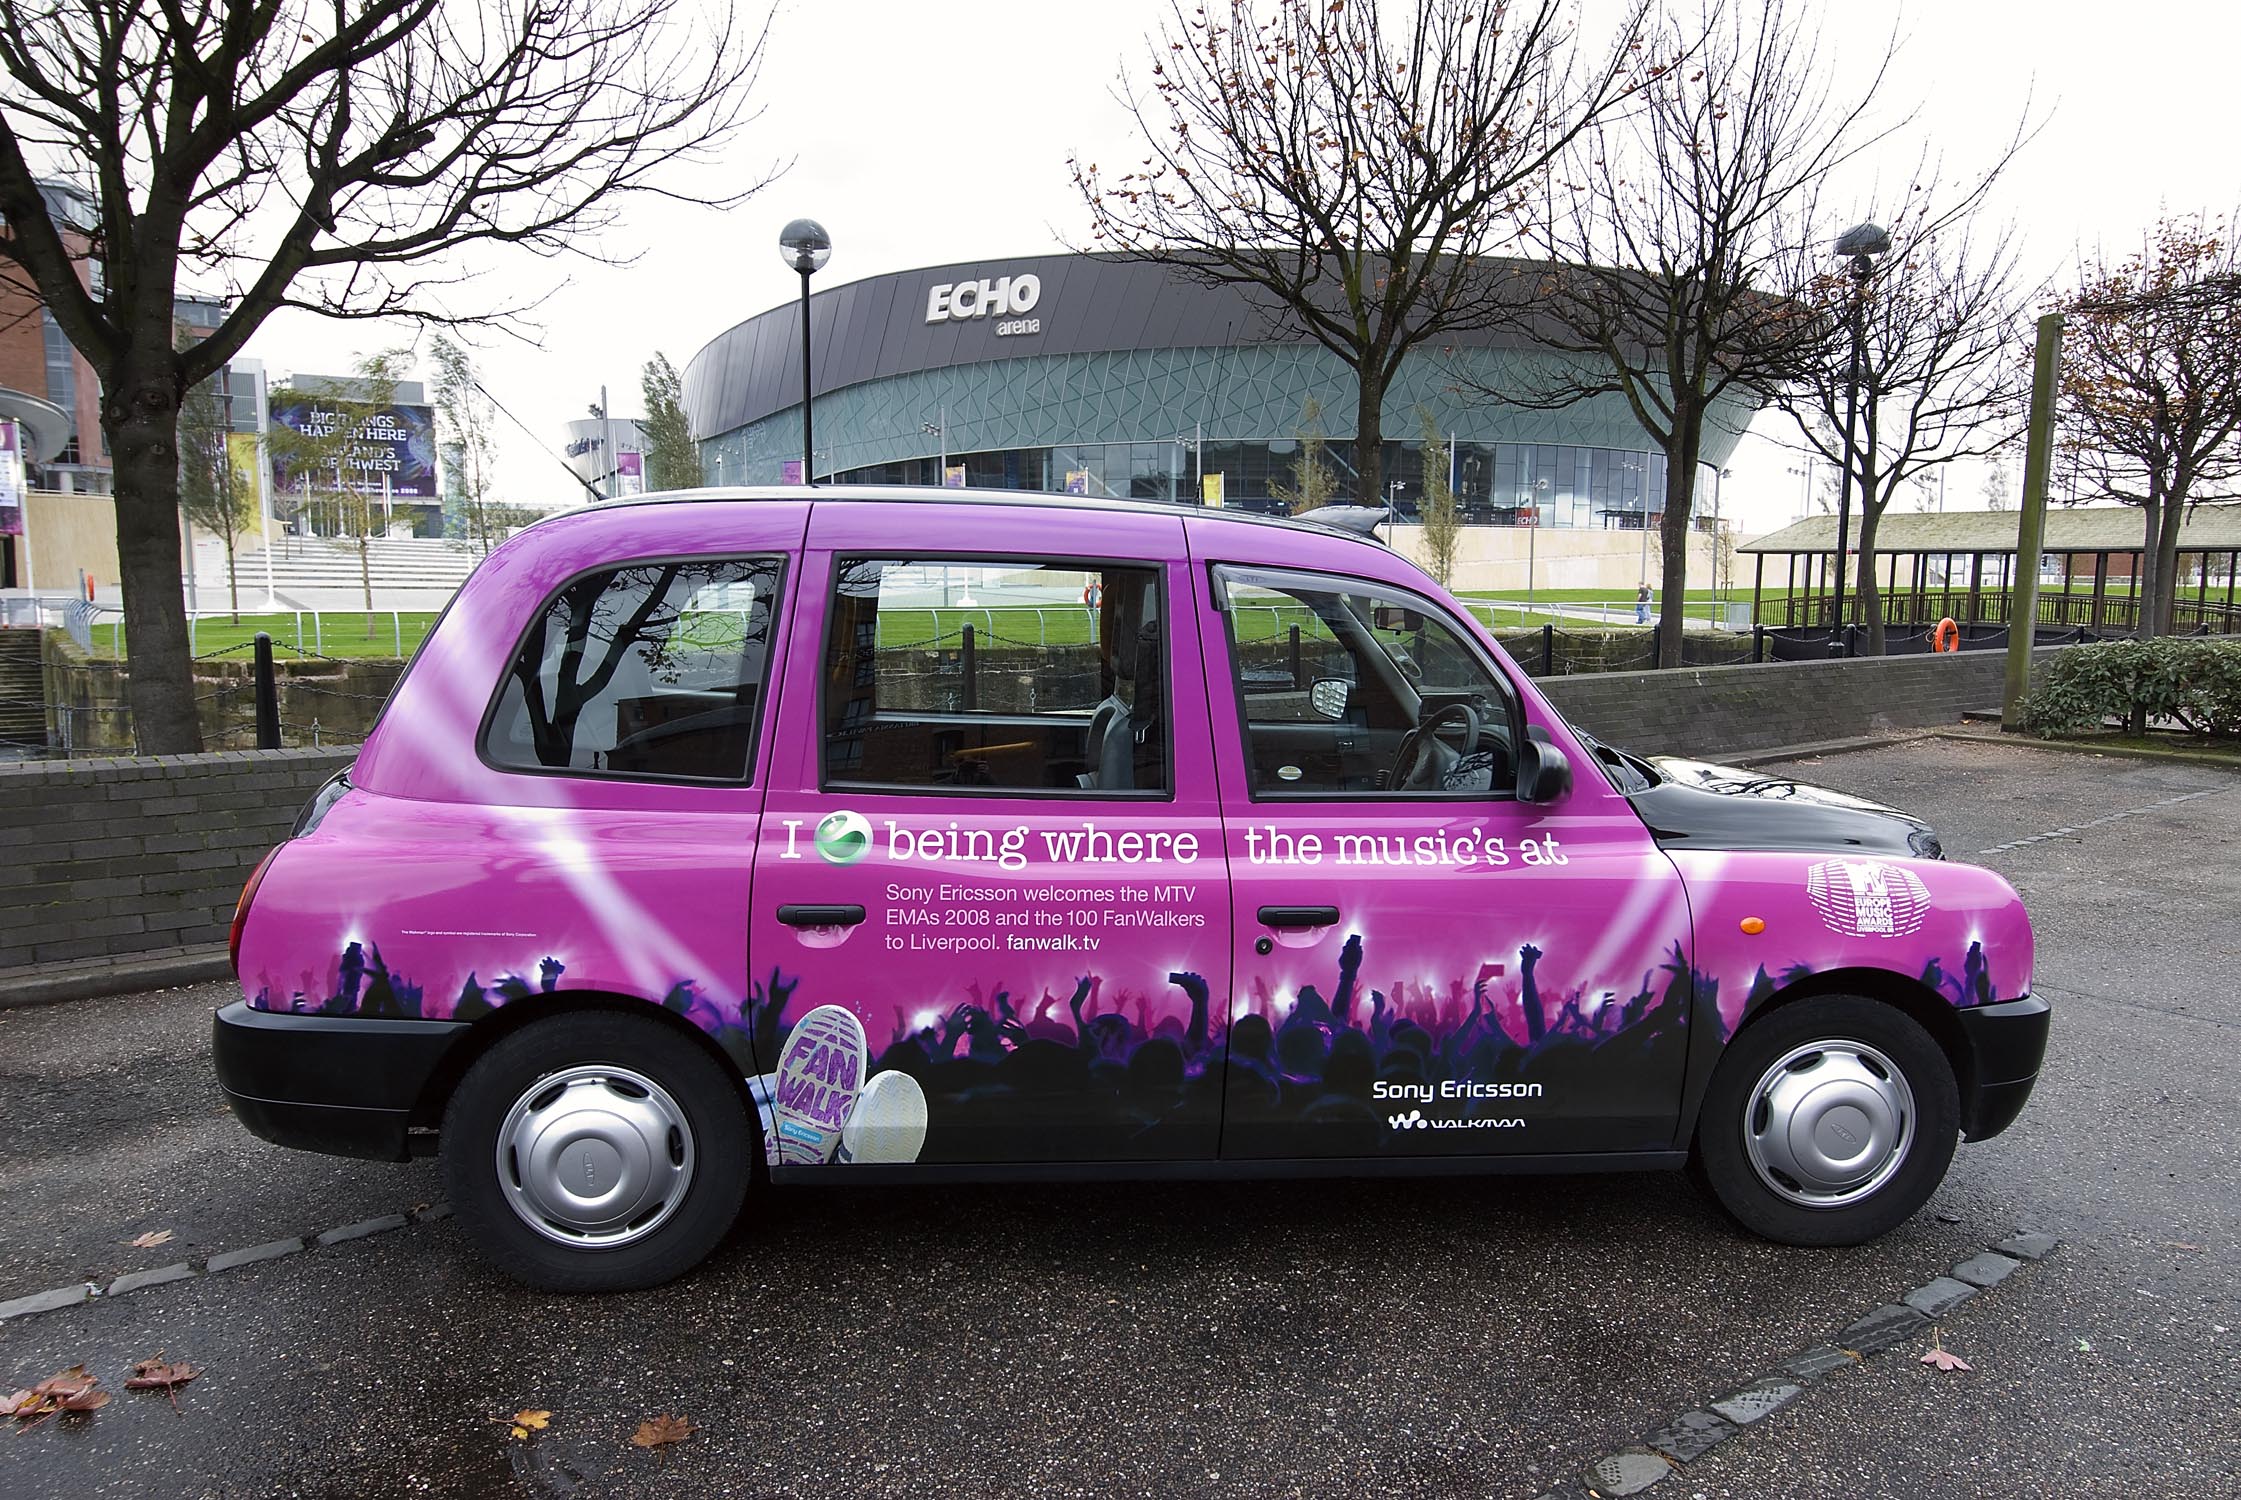 2008 Ubiquitous taxi advertising campaign for Sony Ericsson - I "love" To Be Where The Music's At